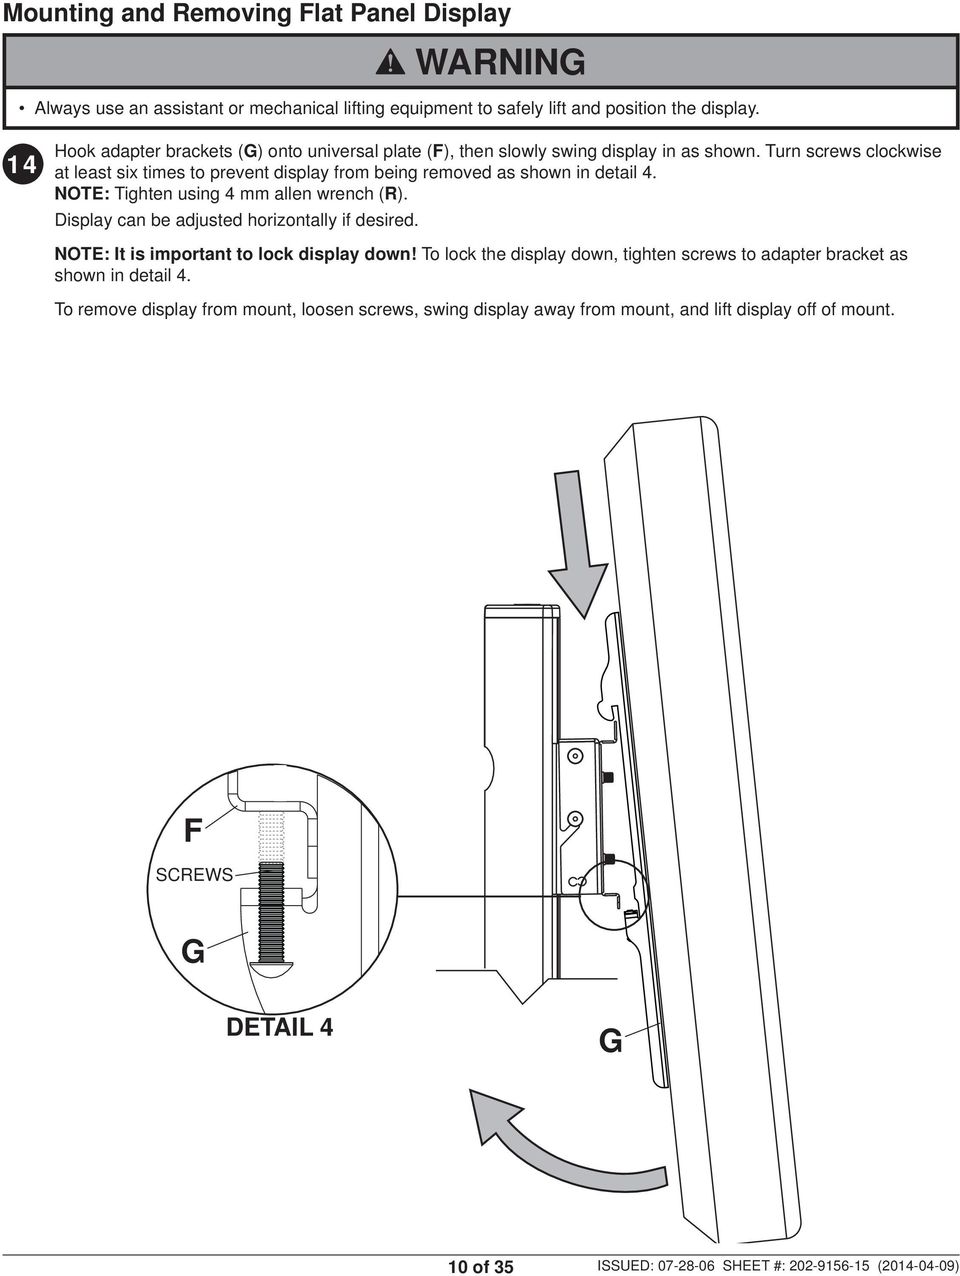 Turn screws clockwise at least six times to prevent display from being removed as shown in detail 4. OTE: Tighten using 4 mm allen wrench (R).